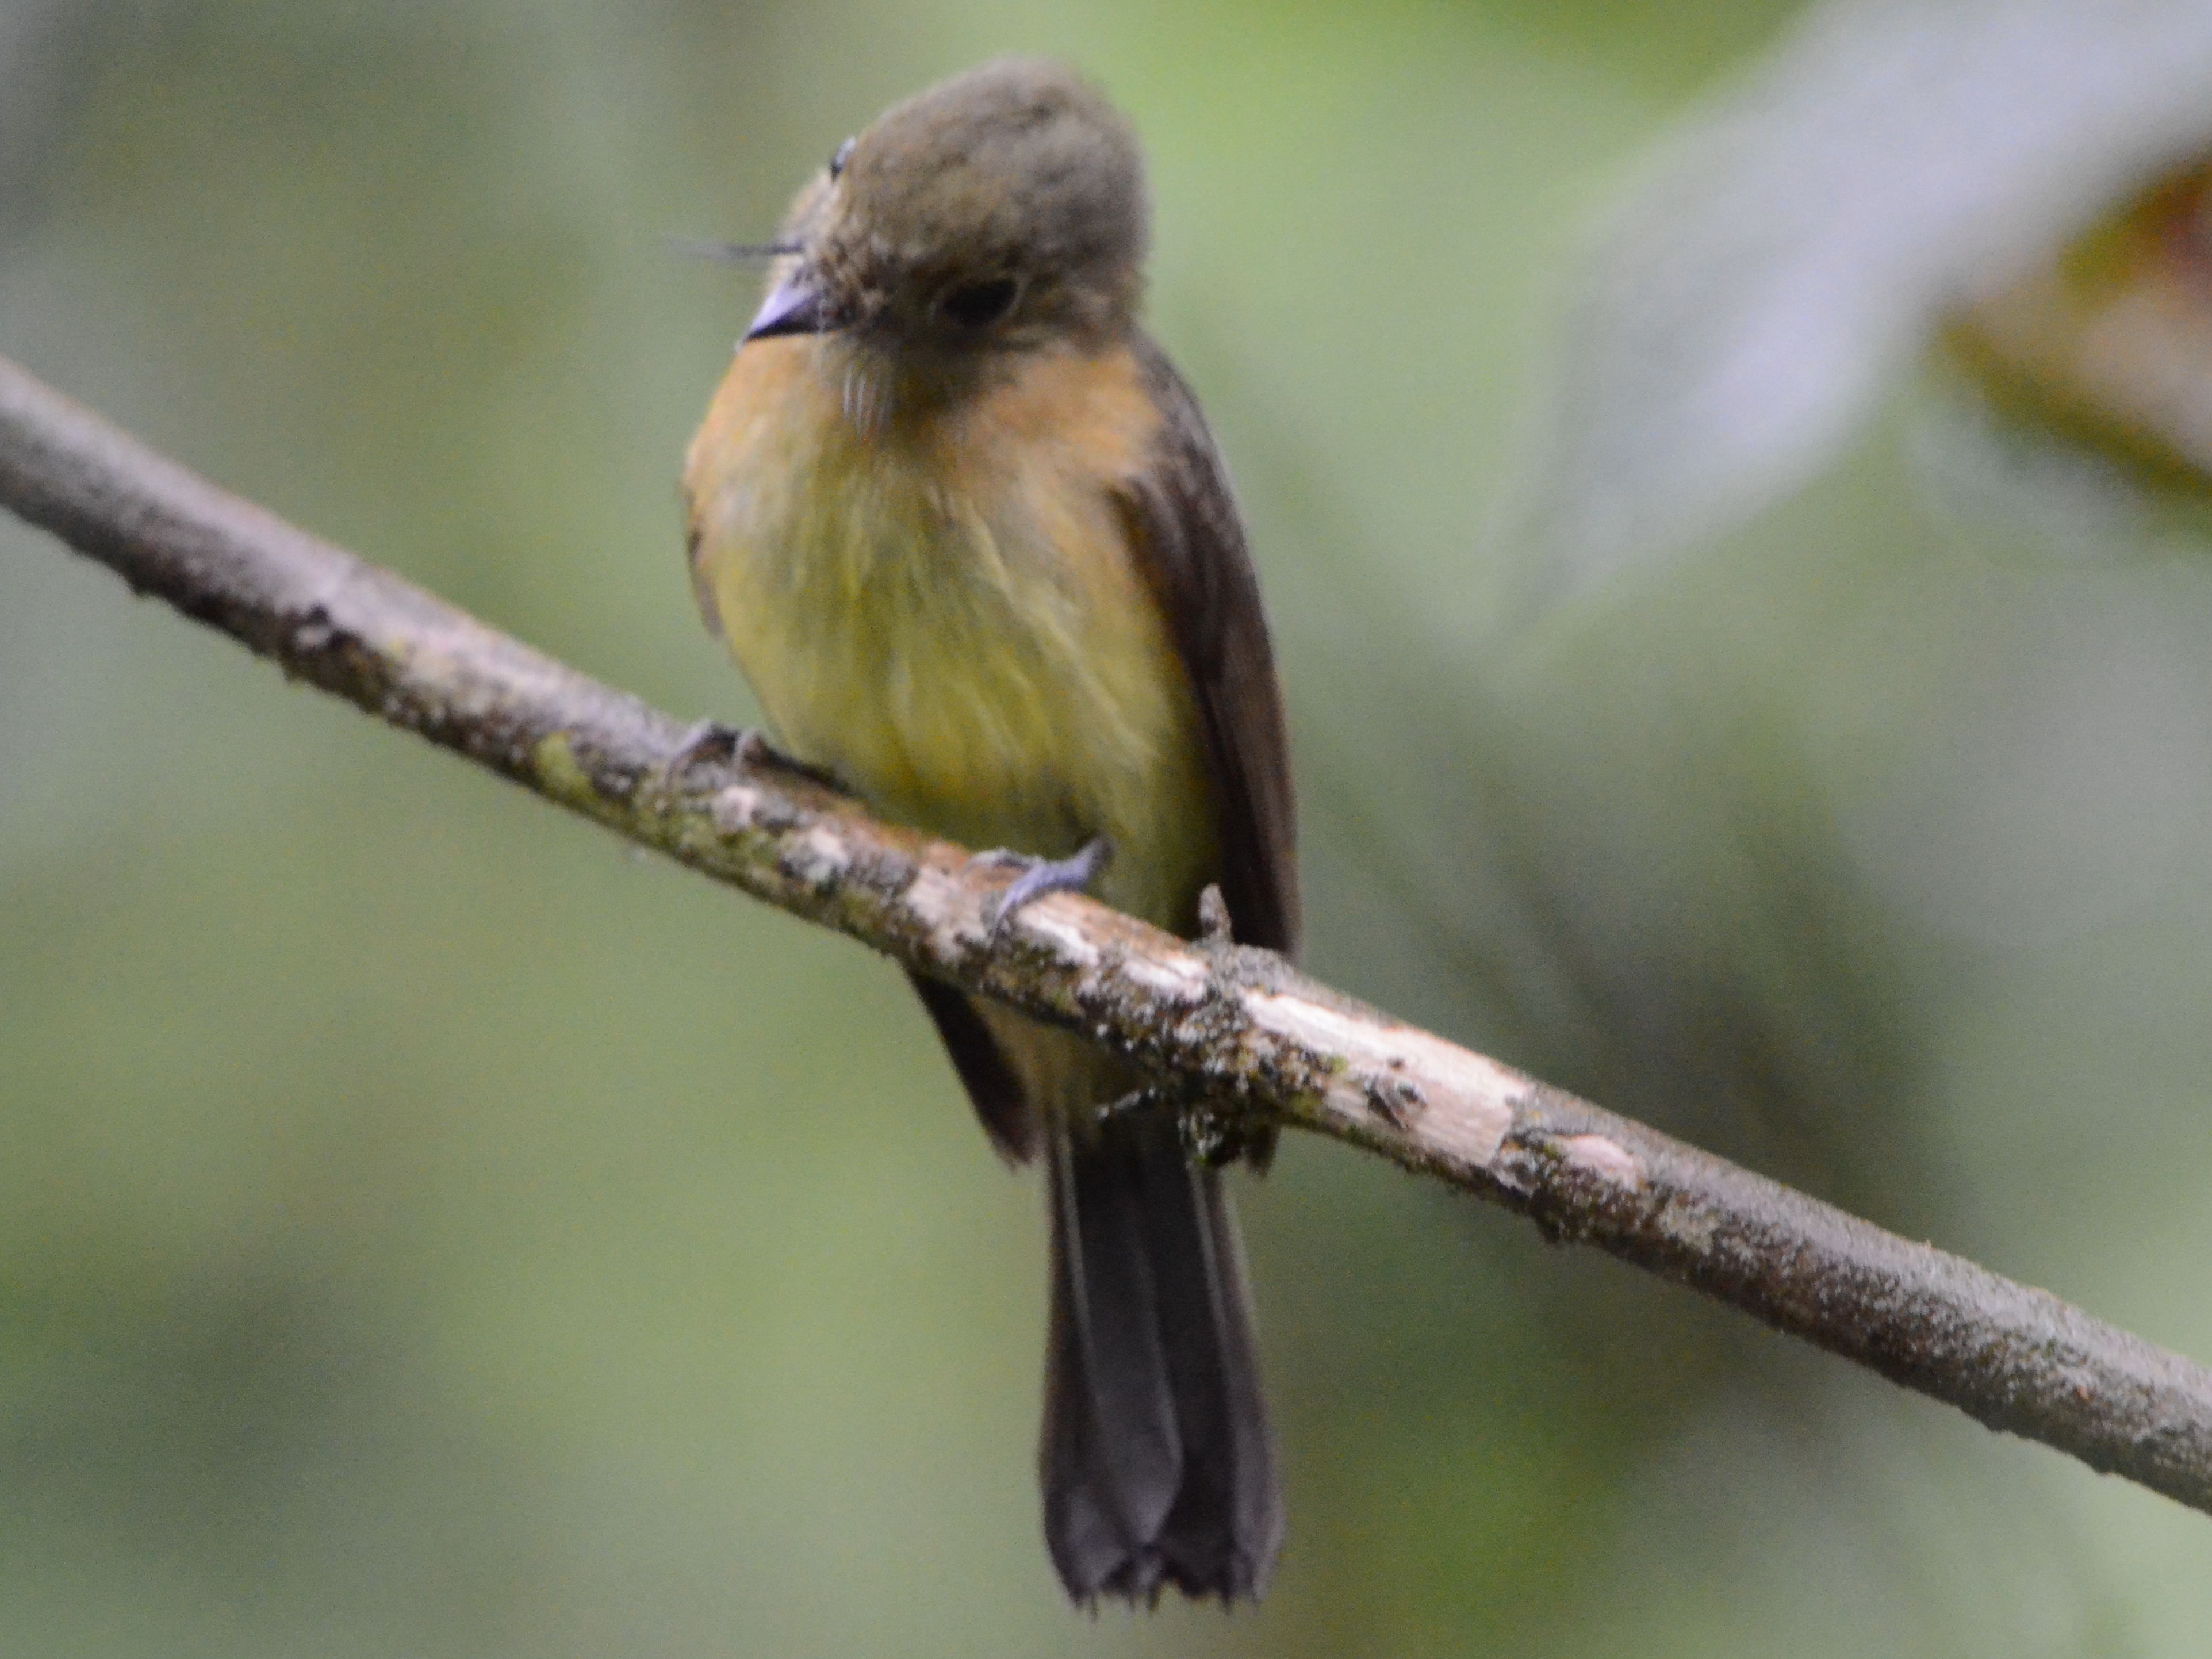 Click picture to see more Yellow-rumped (Whiskered) Flycatchers.